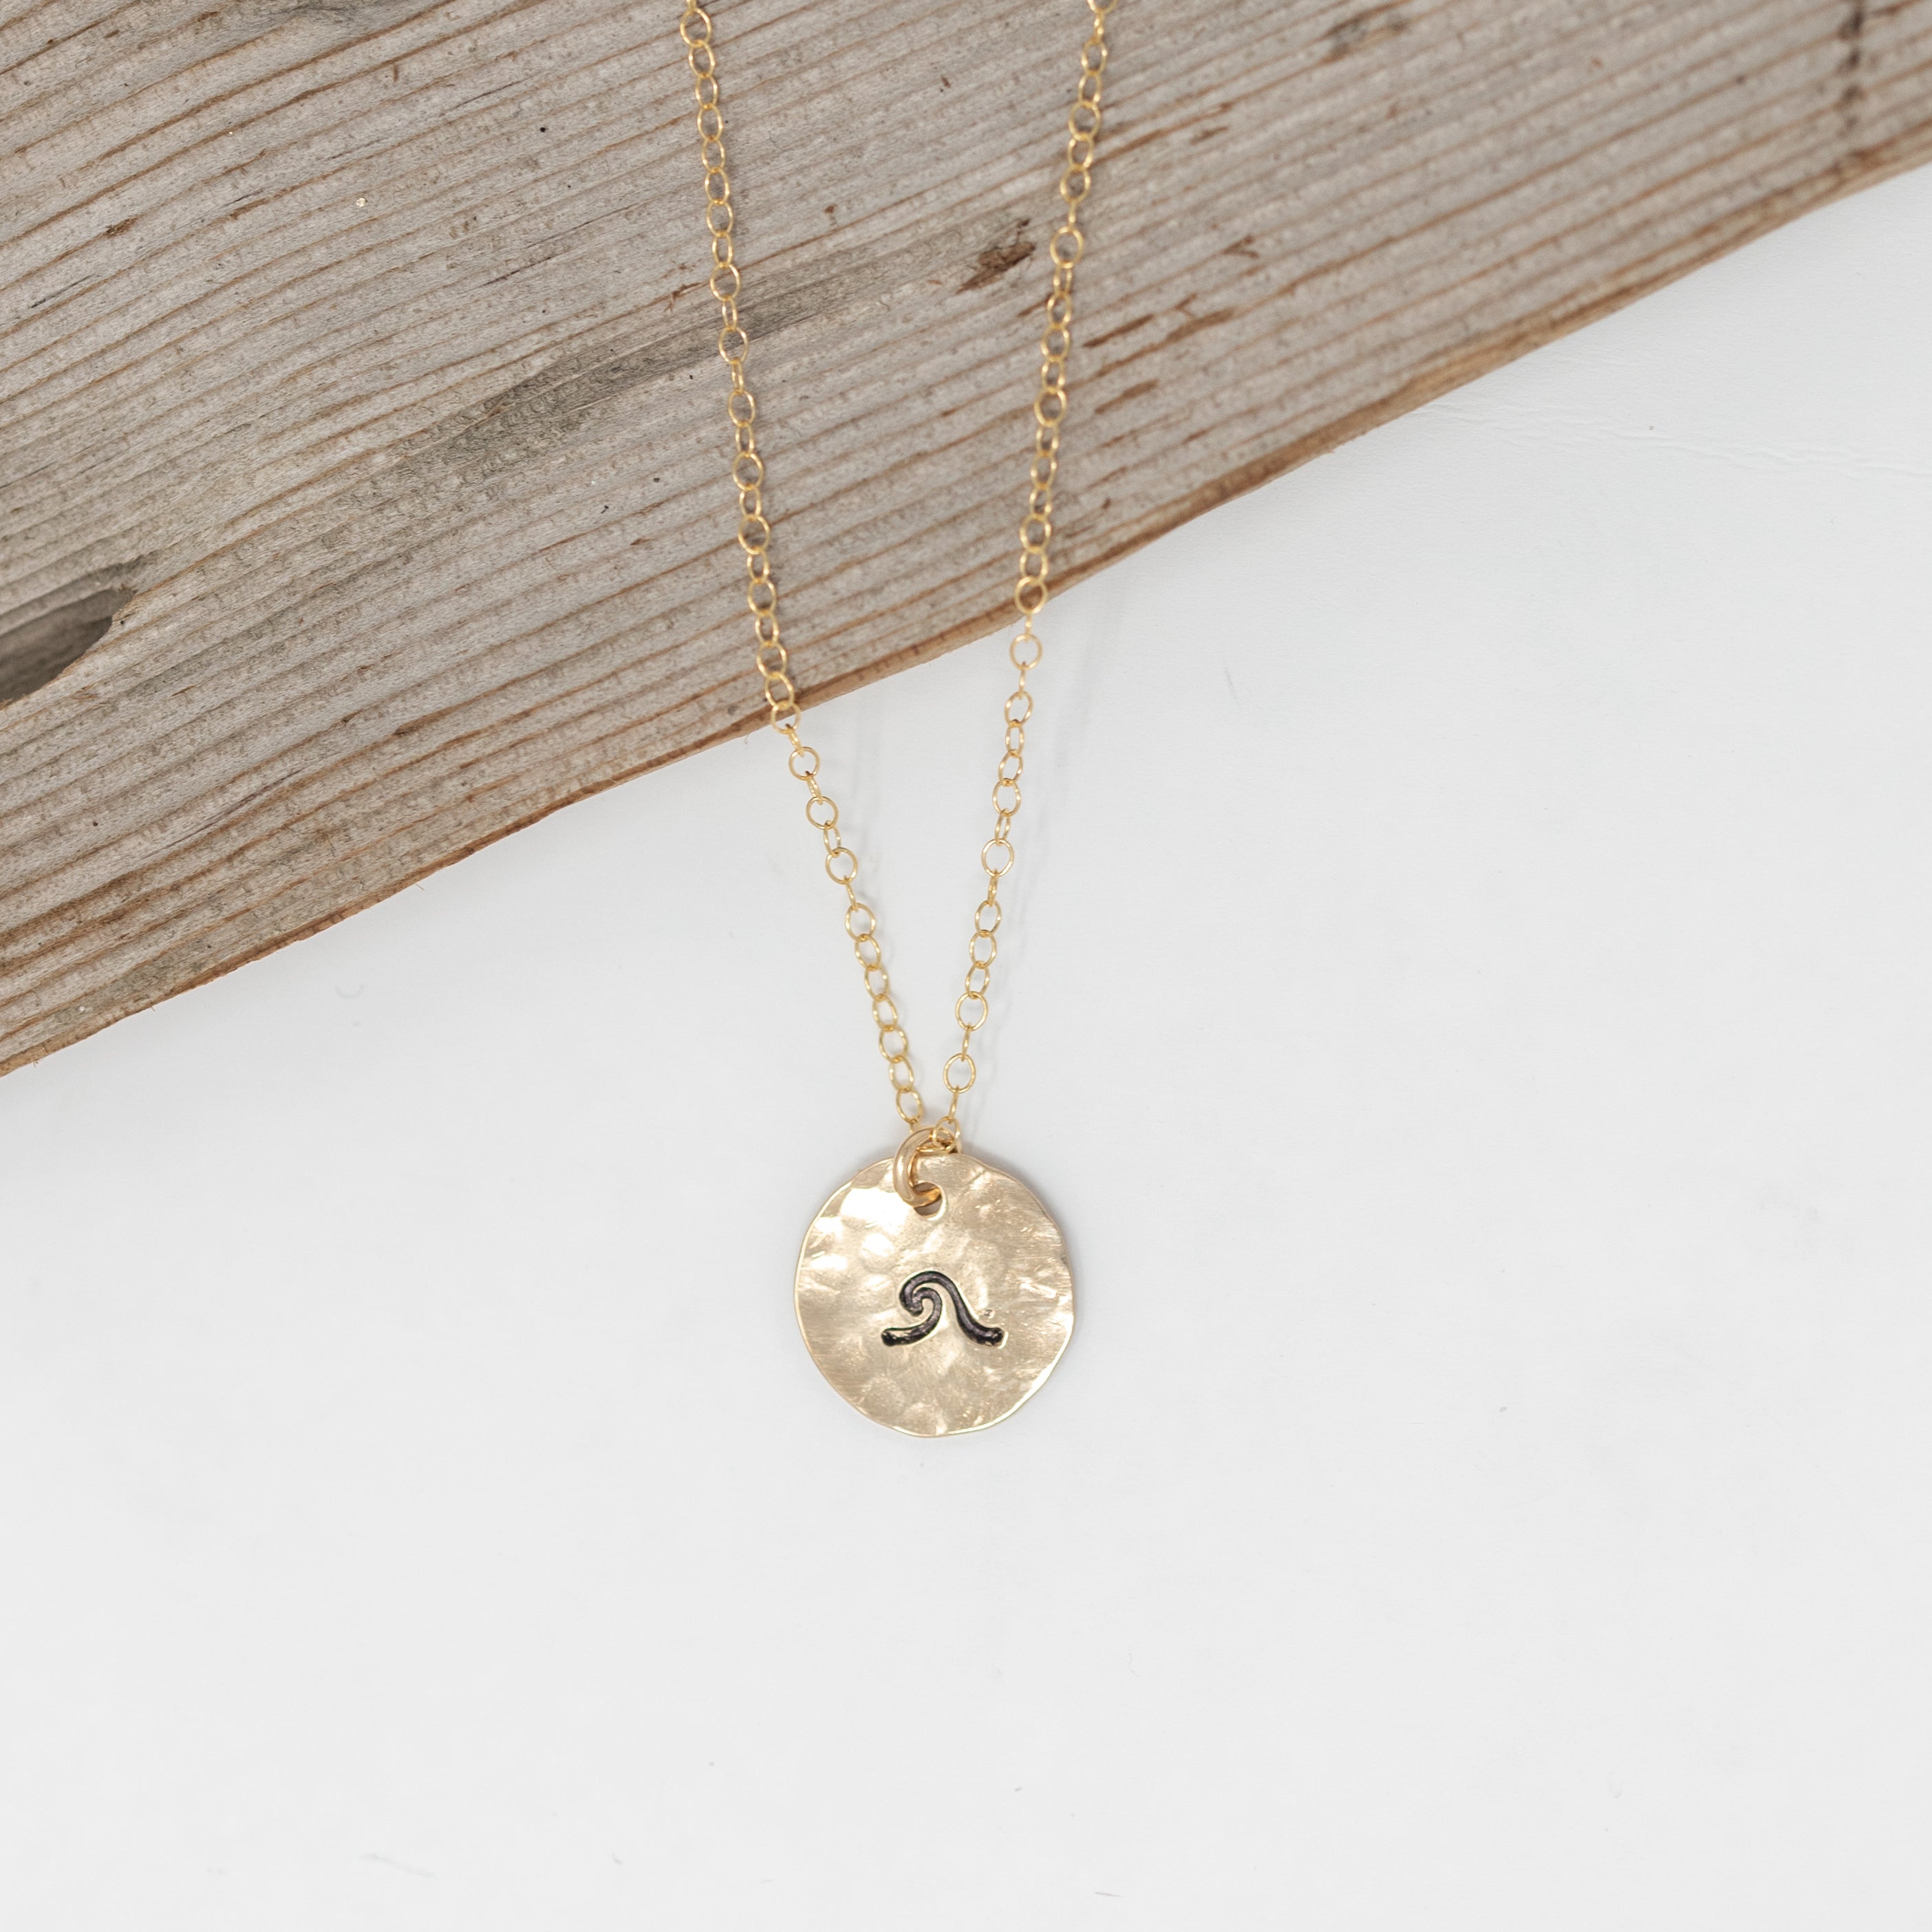 Tiny gold filled circle with a wave stamped onto it. On a gold chain.